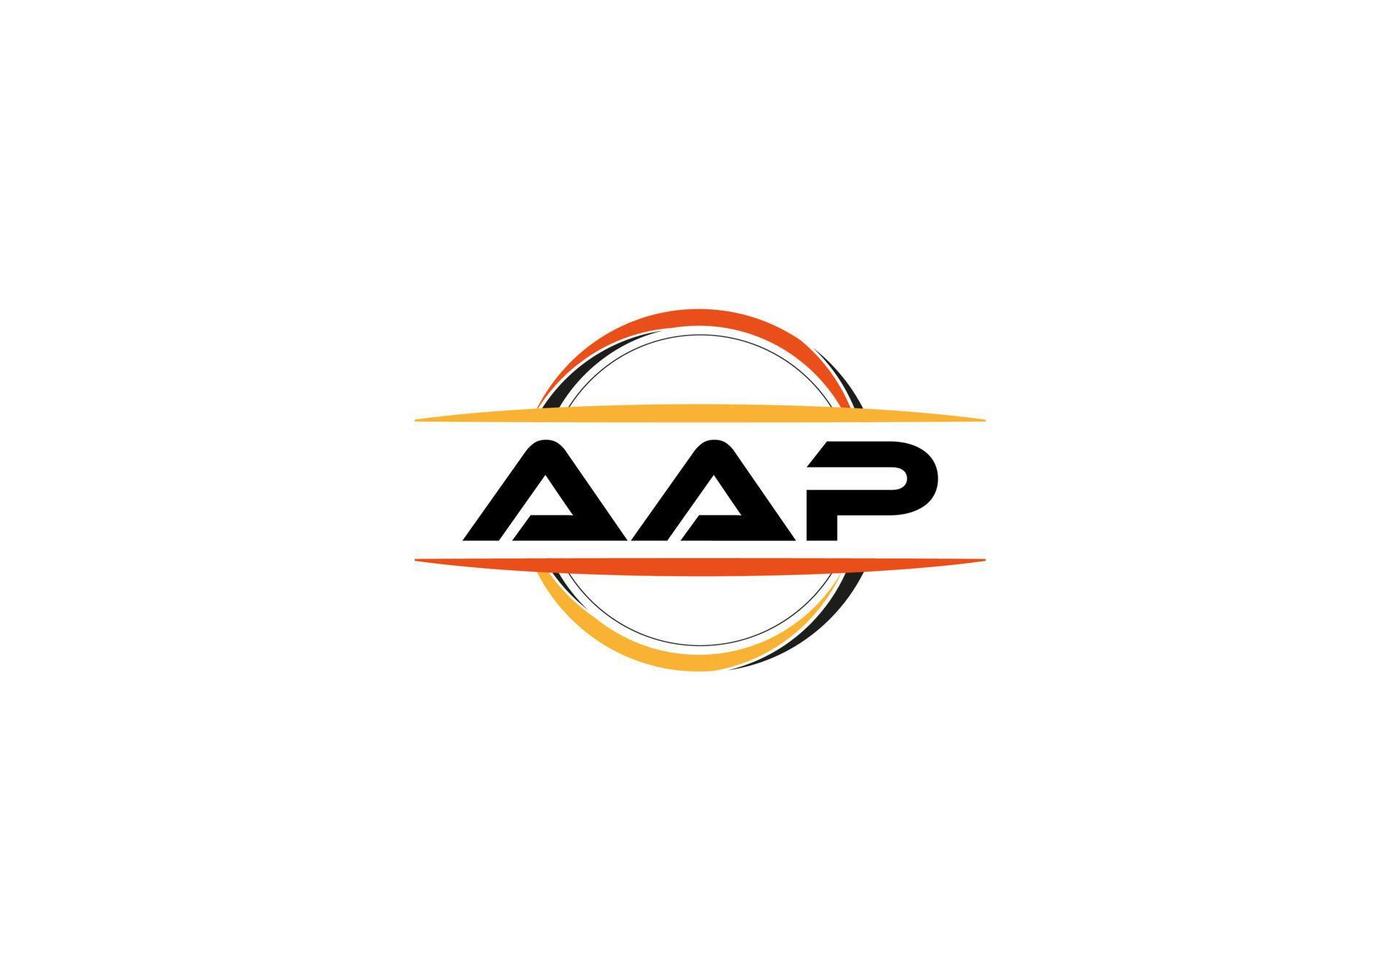 AAP letter royalty ellipse shape logo. AAP brush art logo. AAP logo for a company, business, and commercial use. vector